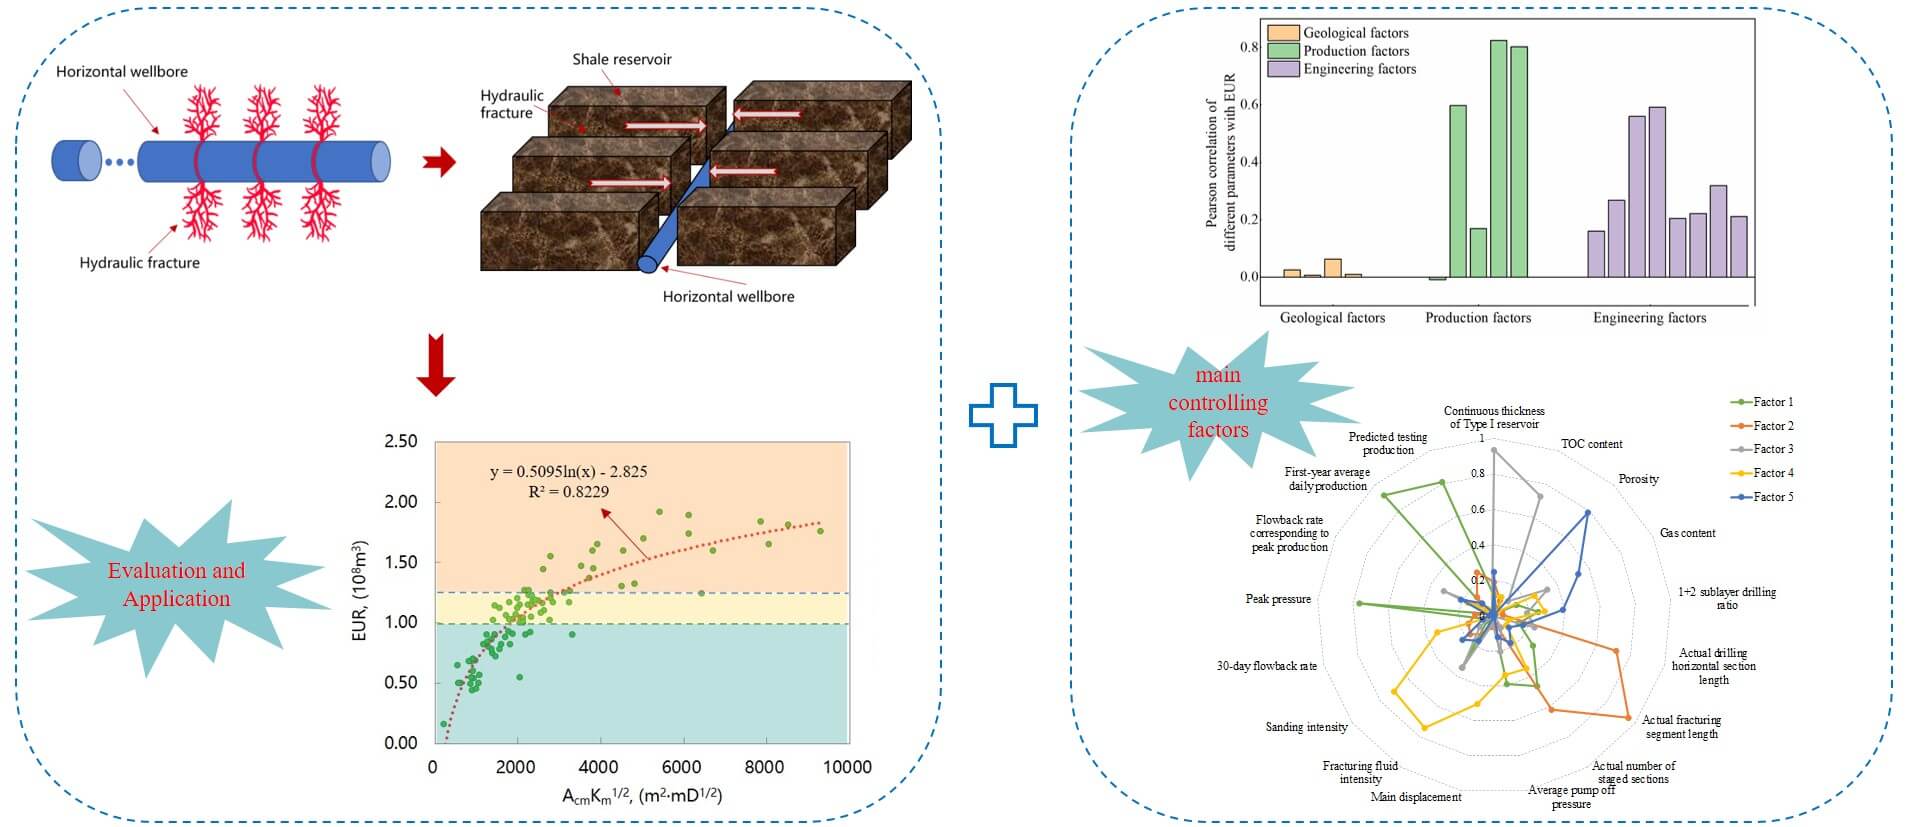 Evaluation and Application of Flowback Effect in Deep Shale Gas Wells